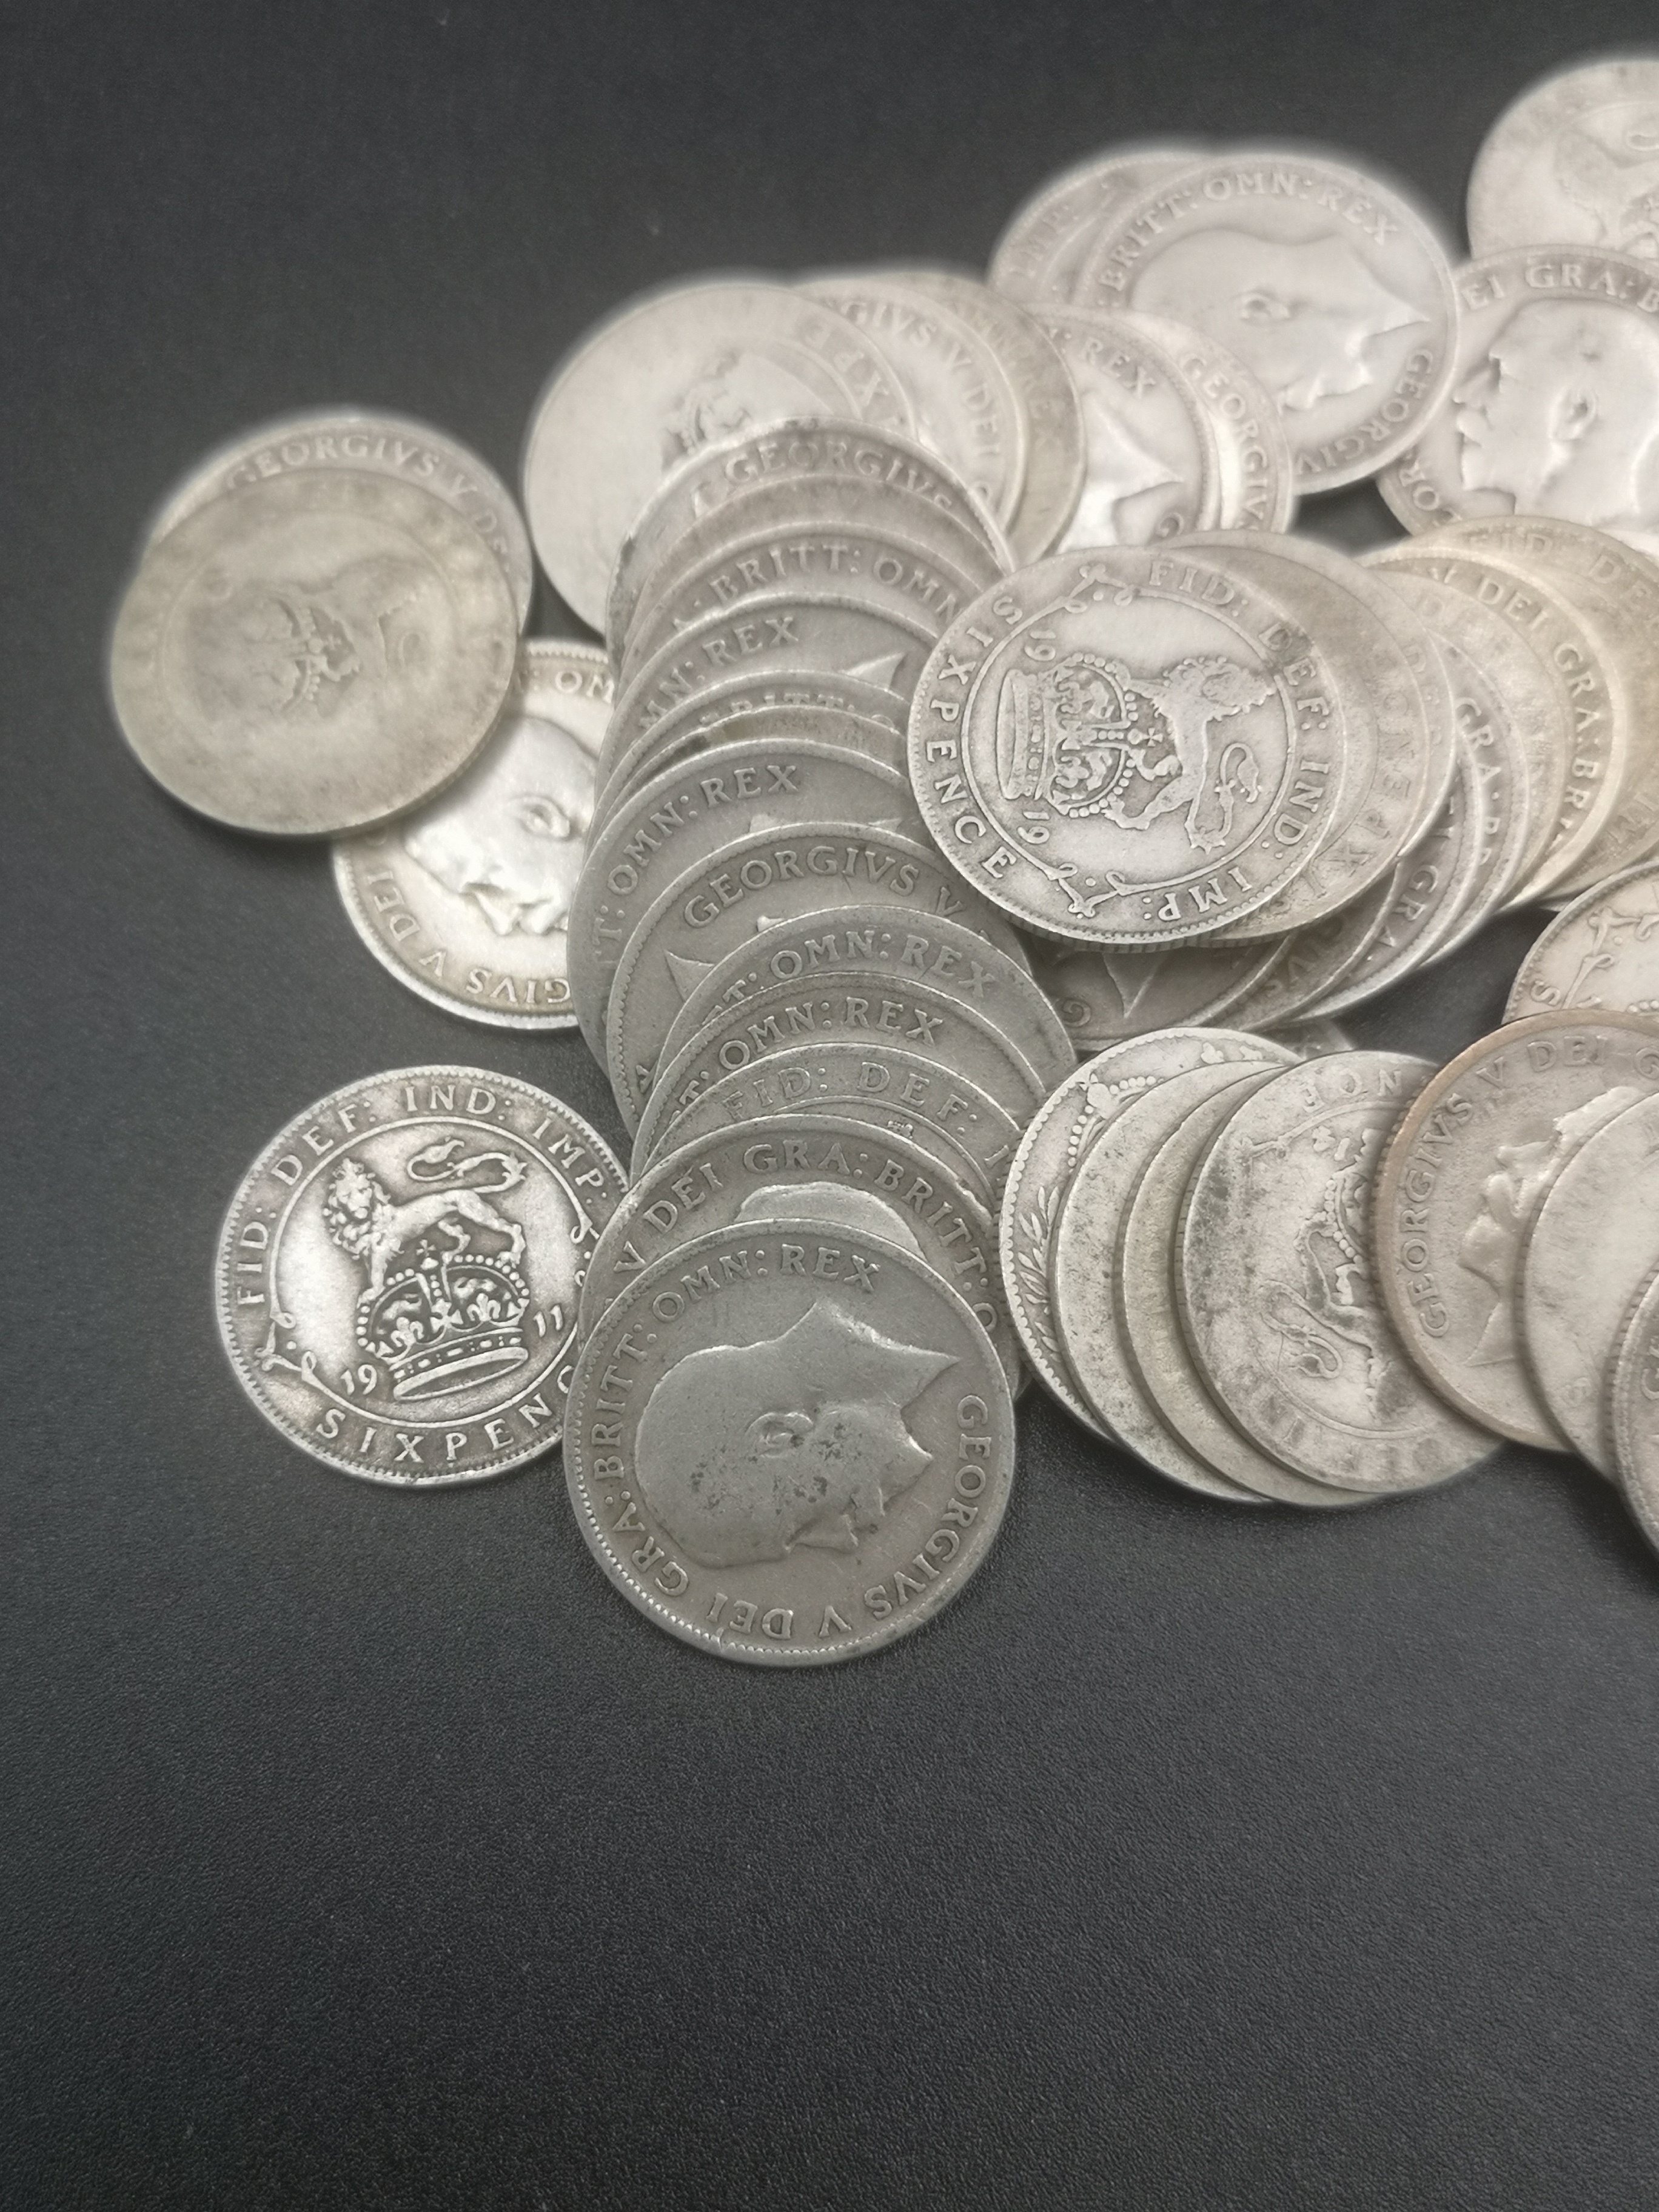 Quantity of pre-1920 silver sixpence coins - Image 4 of 4